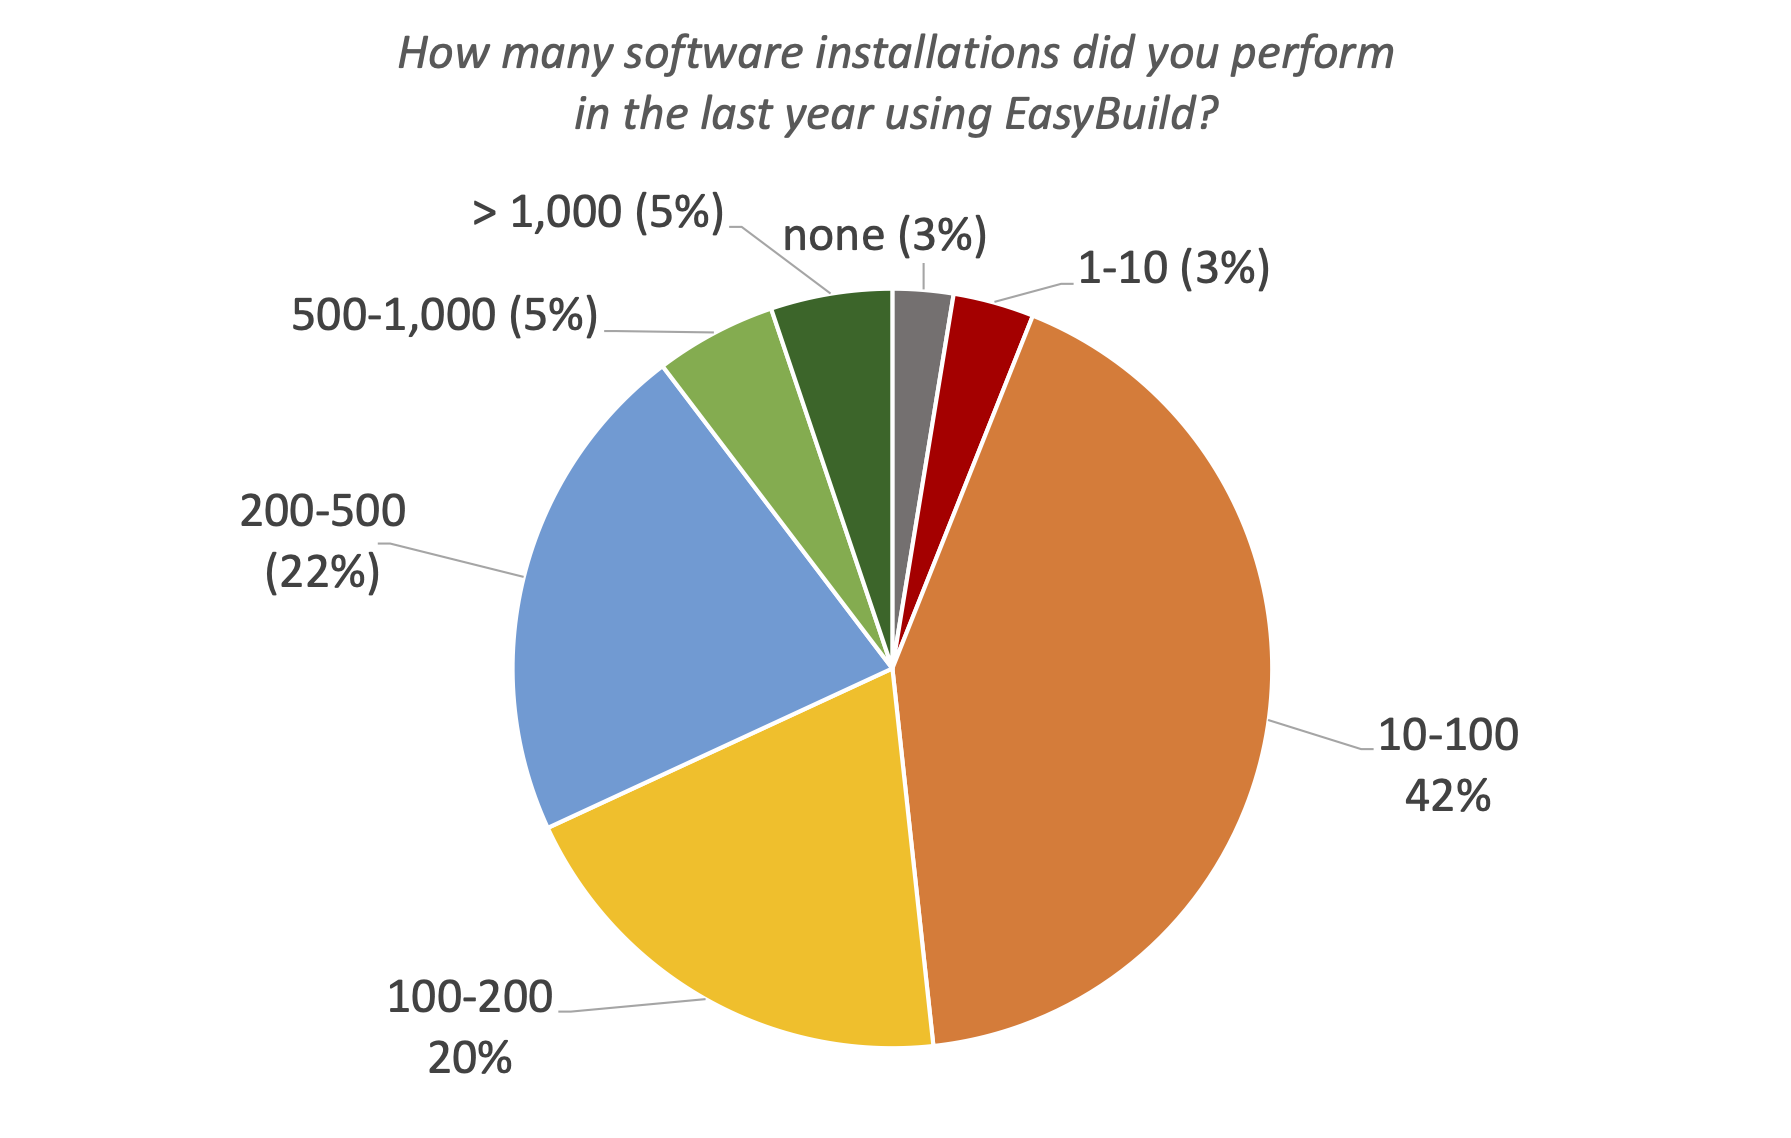 22. How many software installations did you perform in the last year using EasyBuild?